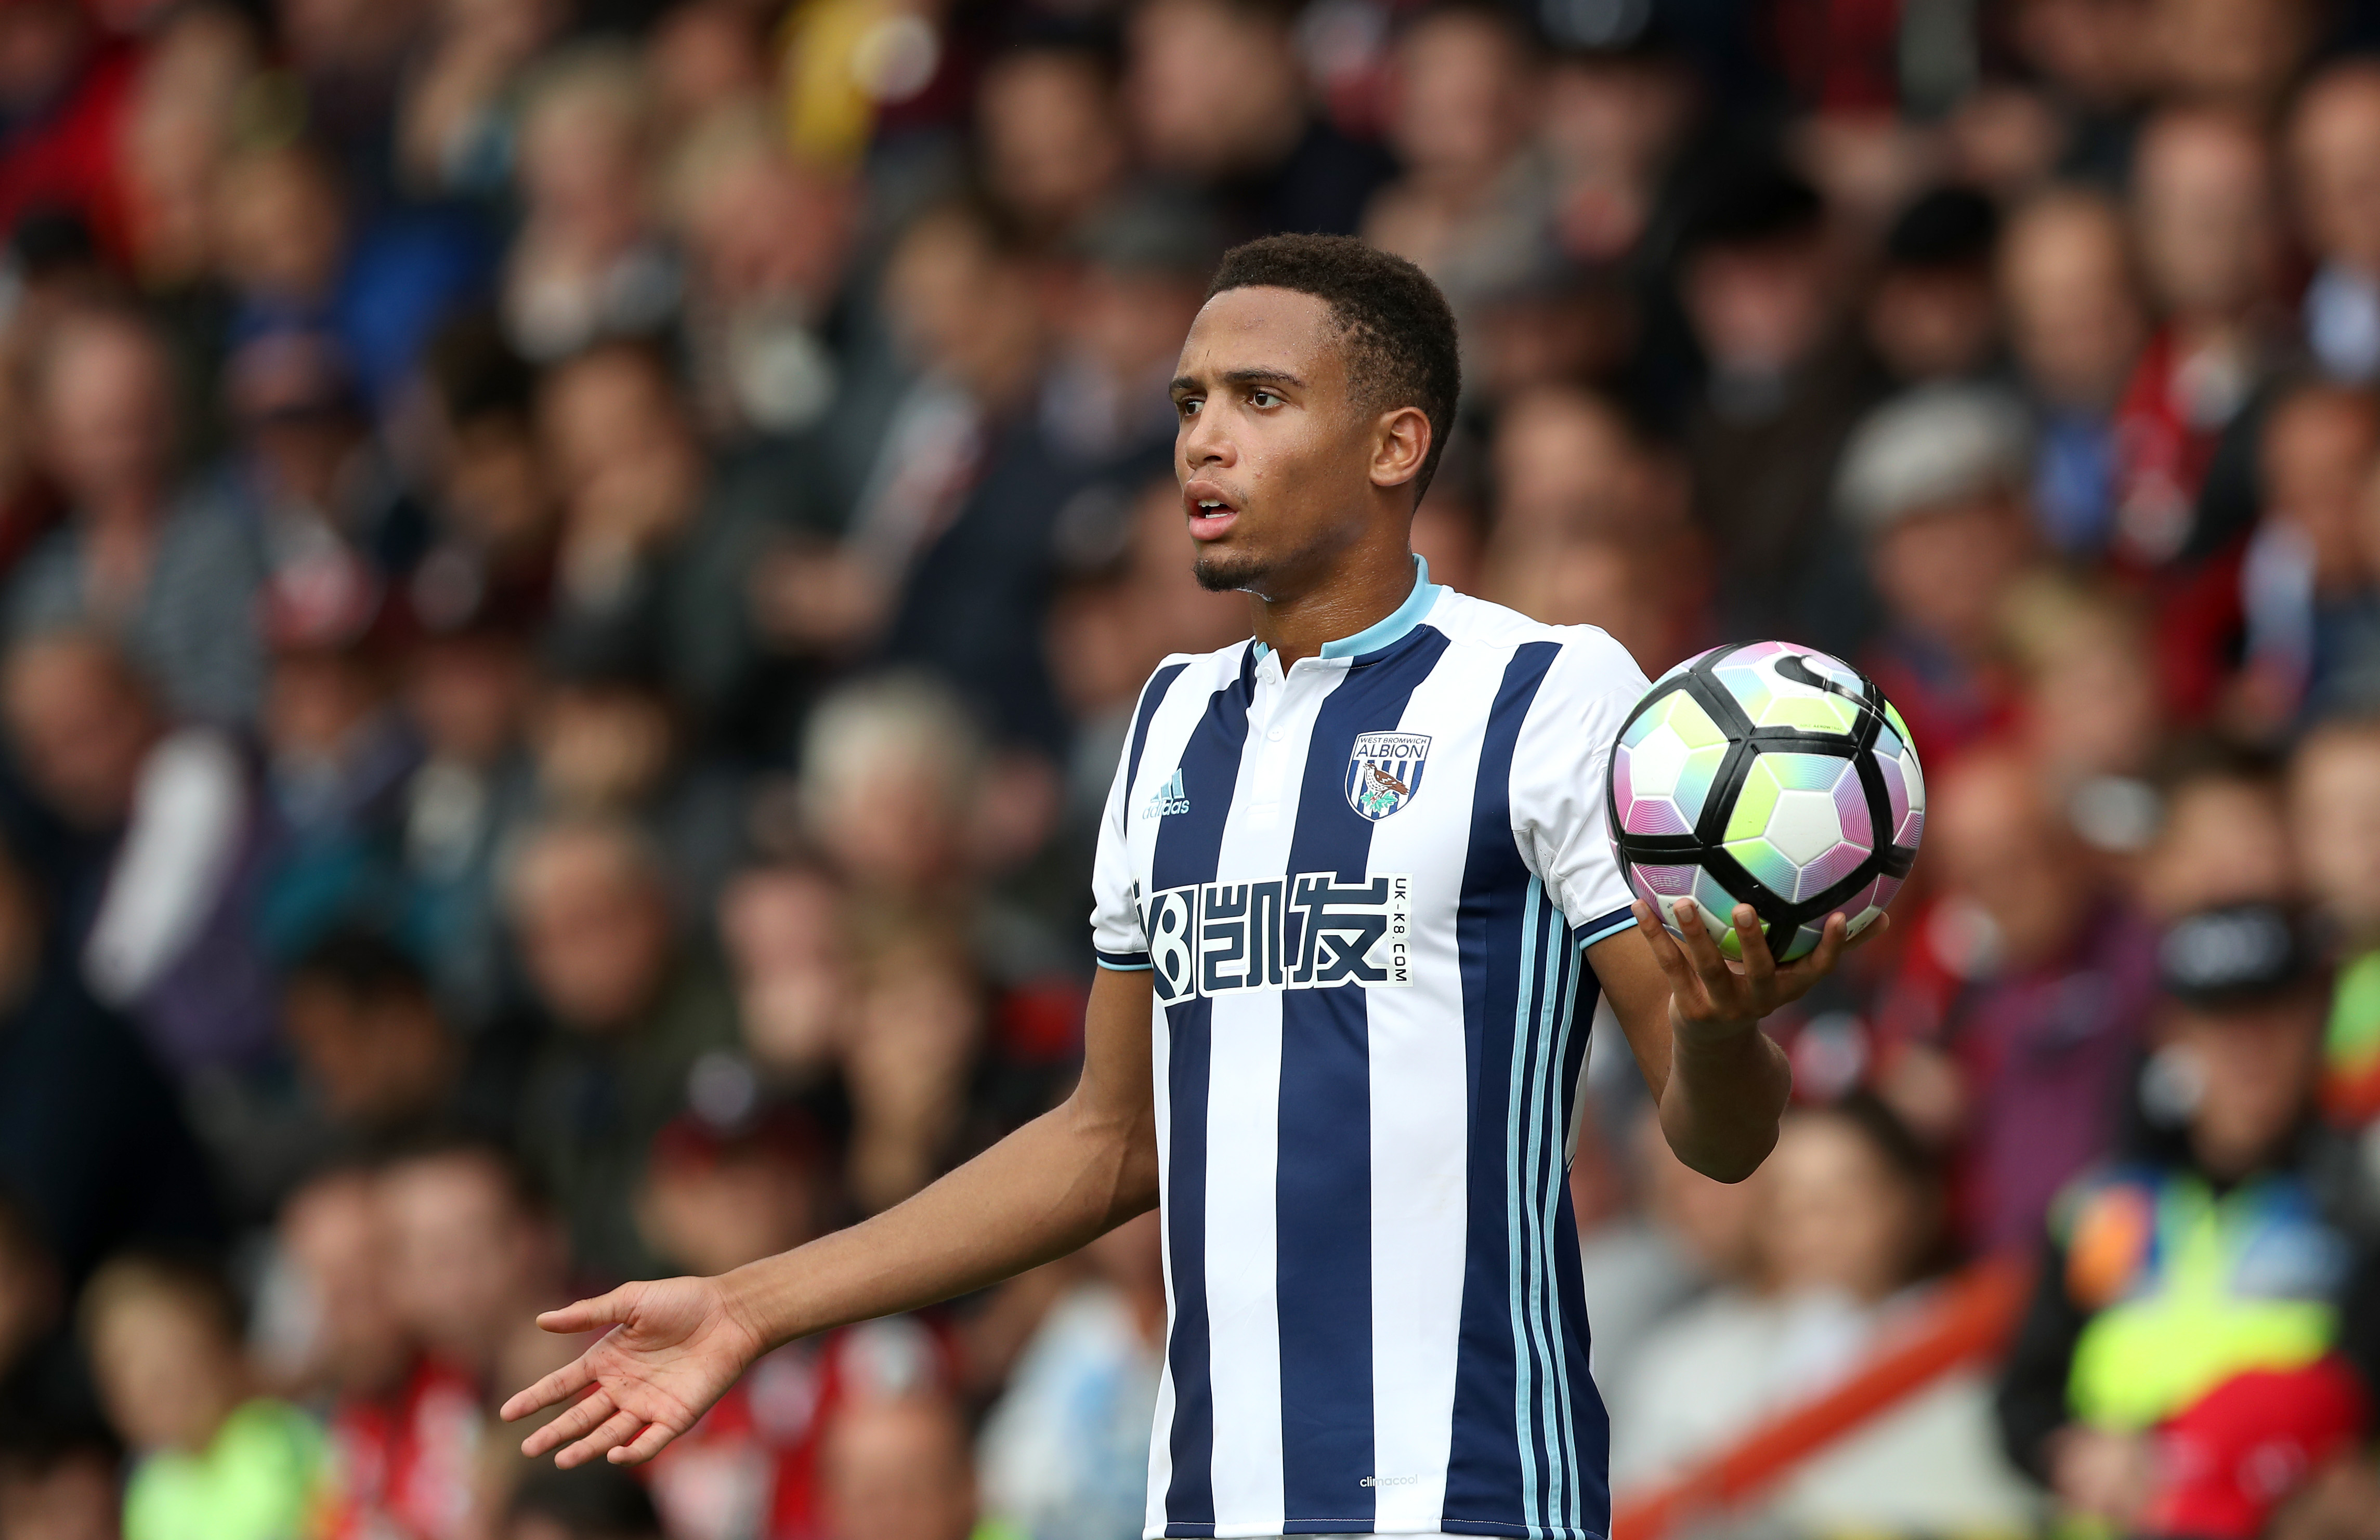 West Brom VS Bournemouth ( BETTING TIPS, Match Preview & Expert Analysis )